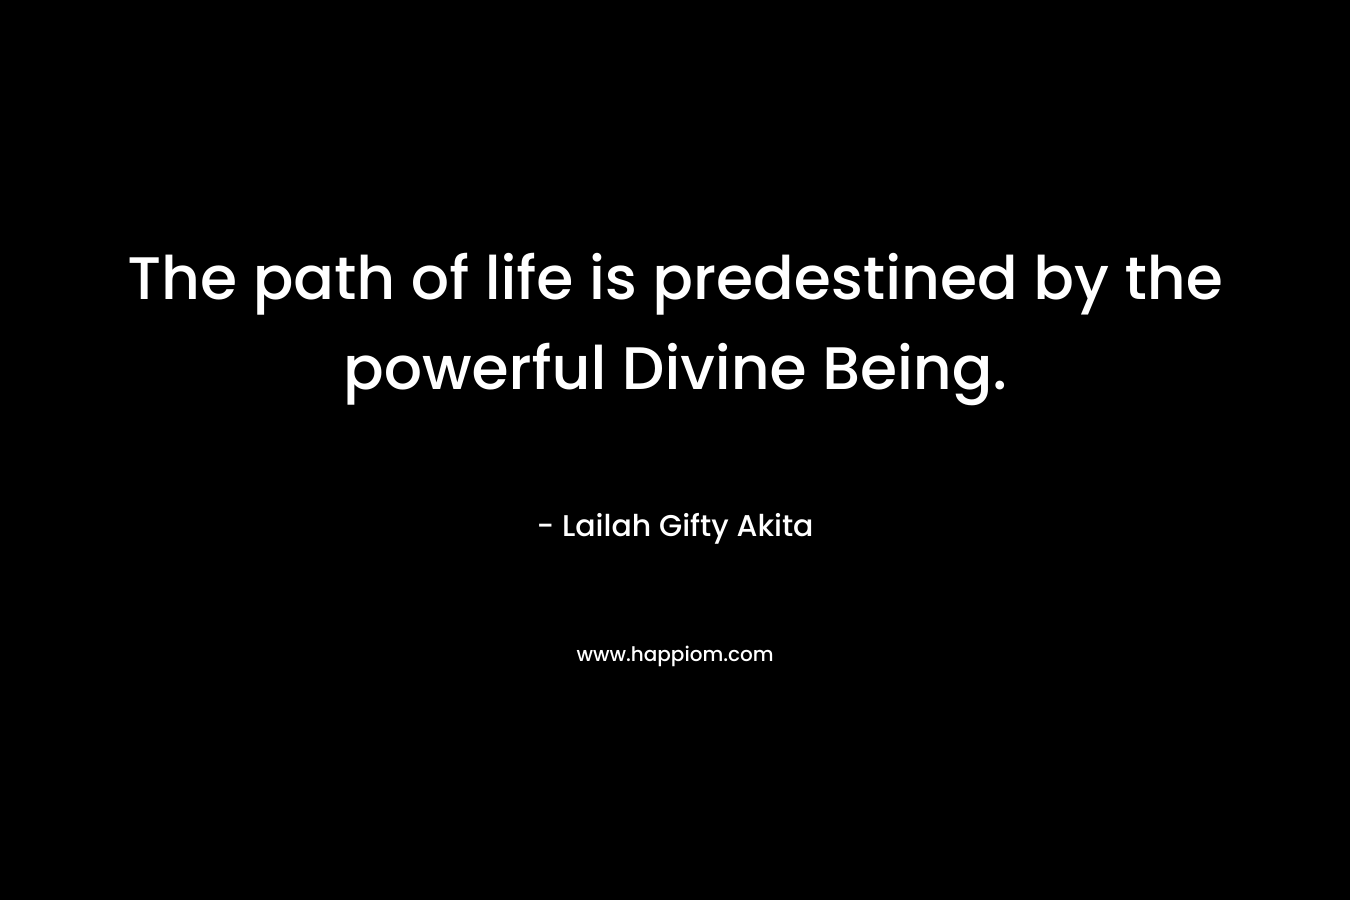 The path of life is predestined by the powerful Divine Being.